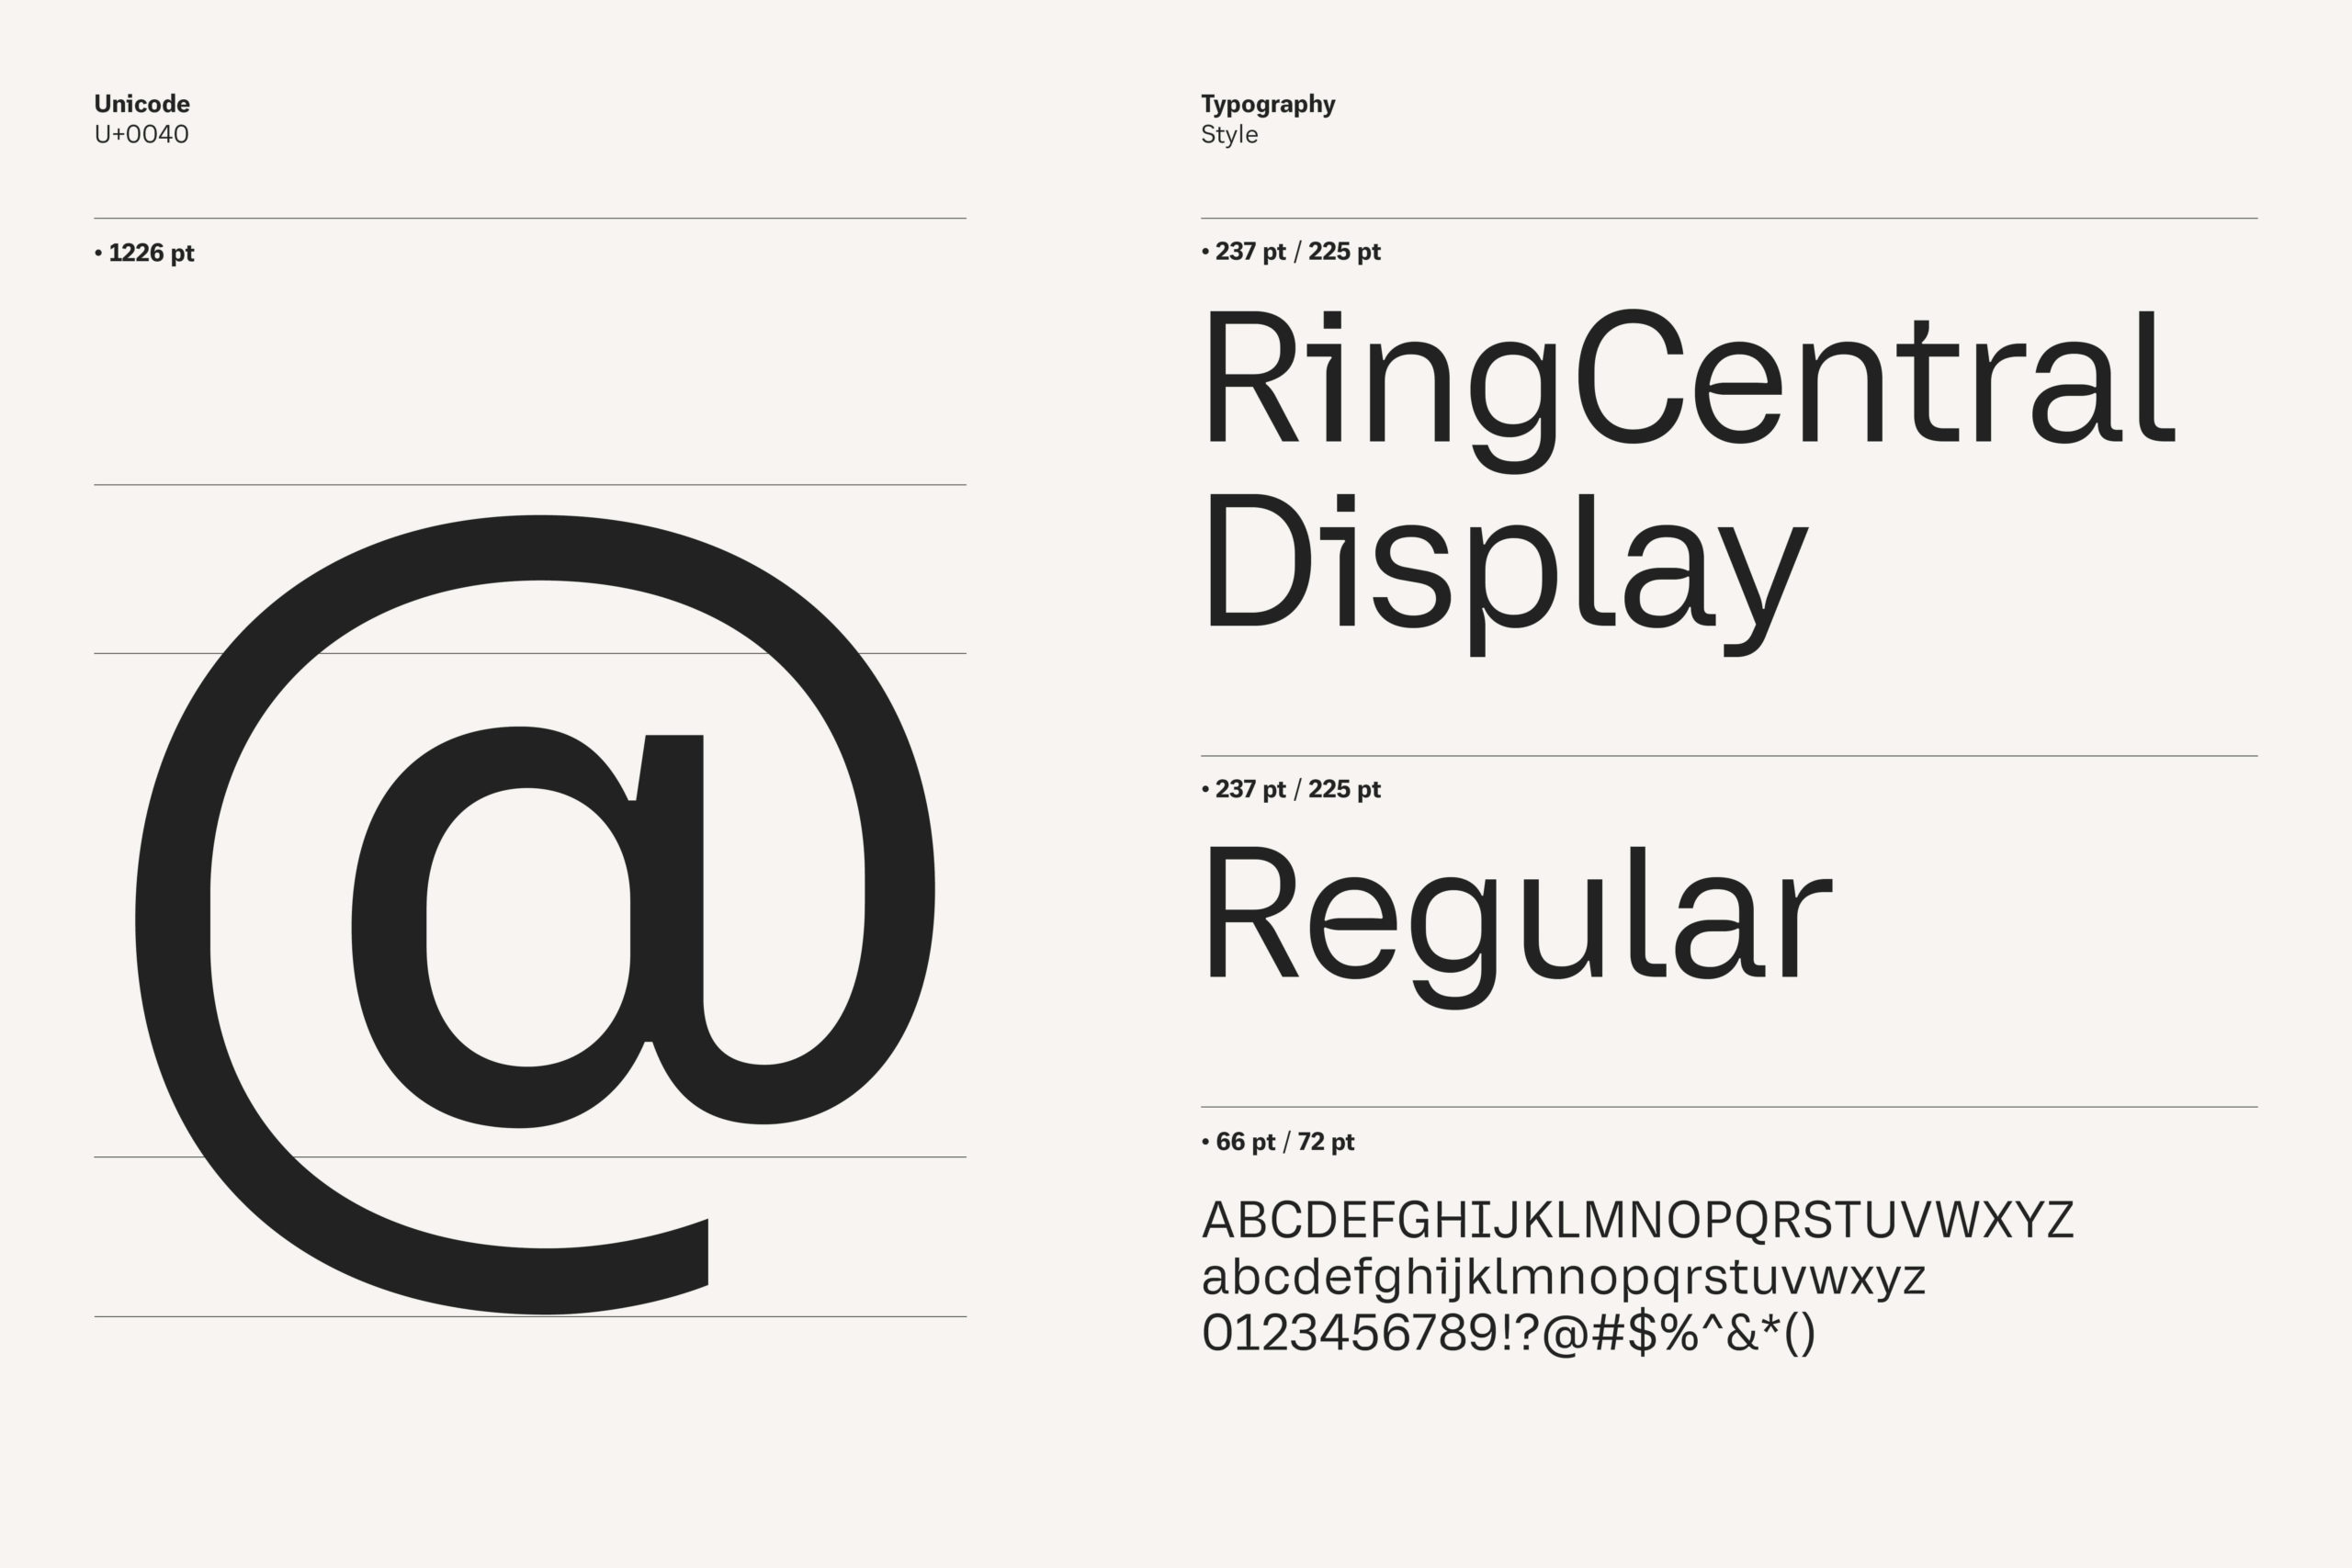 RingCentral Display_Typeface_09142221